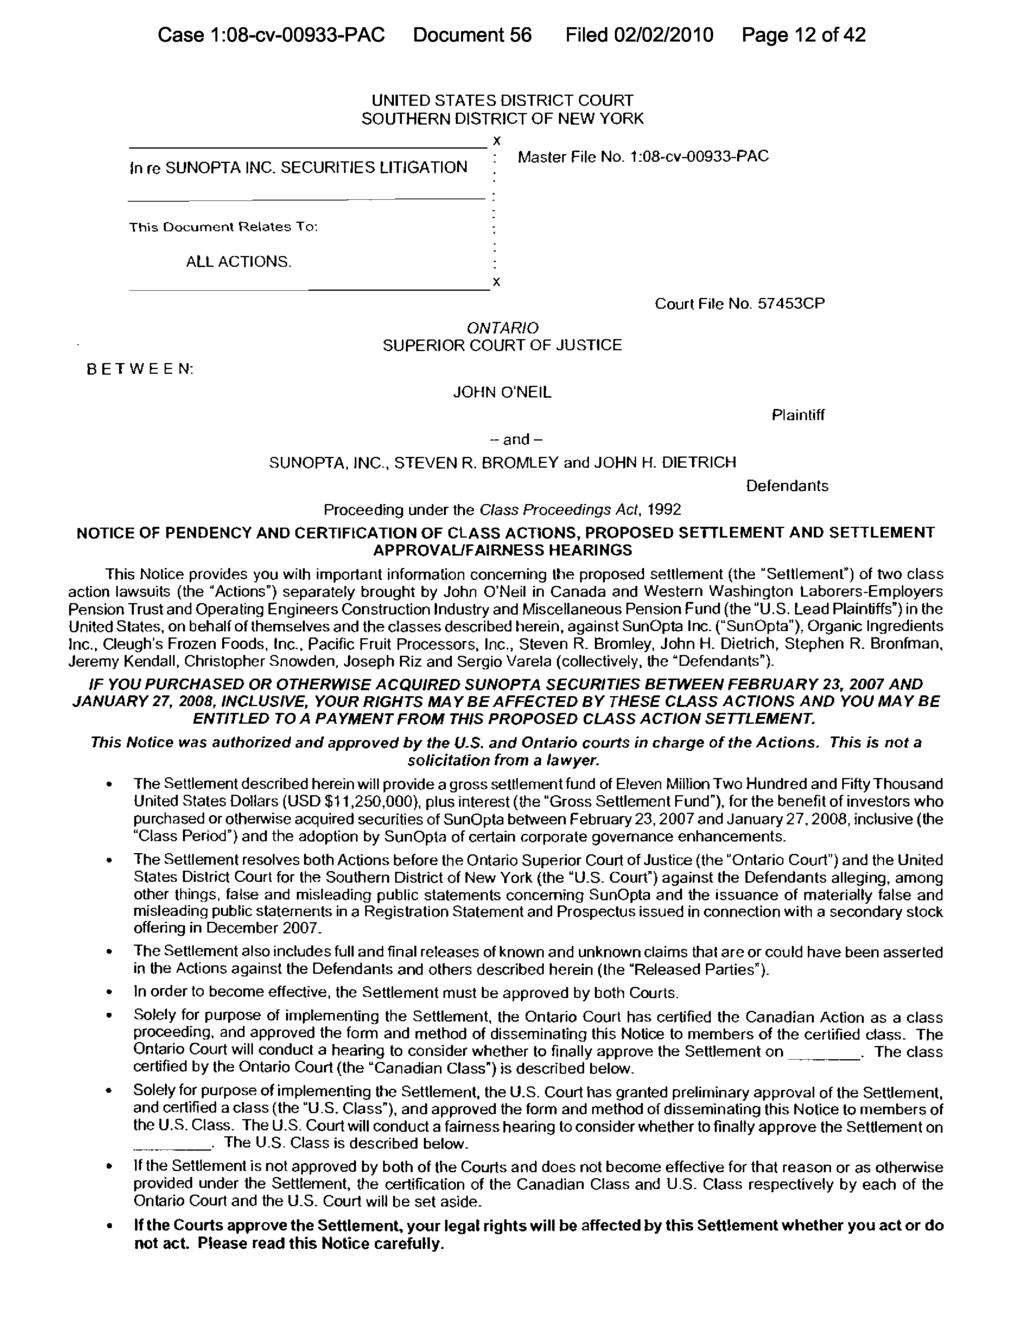 Case 1:08-cv-00933-PAC Document 56 Filed 02/02/2010 Page 12 of 42 UNITED STATES DISTRICT COURT SOUTHERN DISTRICT OF NEW YORK x Master File No. 1:08-cv-00933-PAC In re SUNOPTA INC.